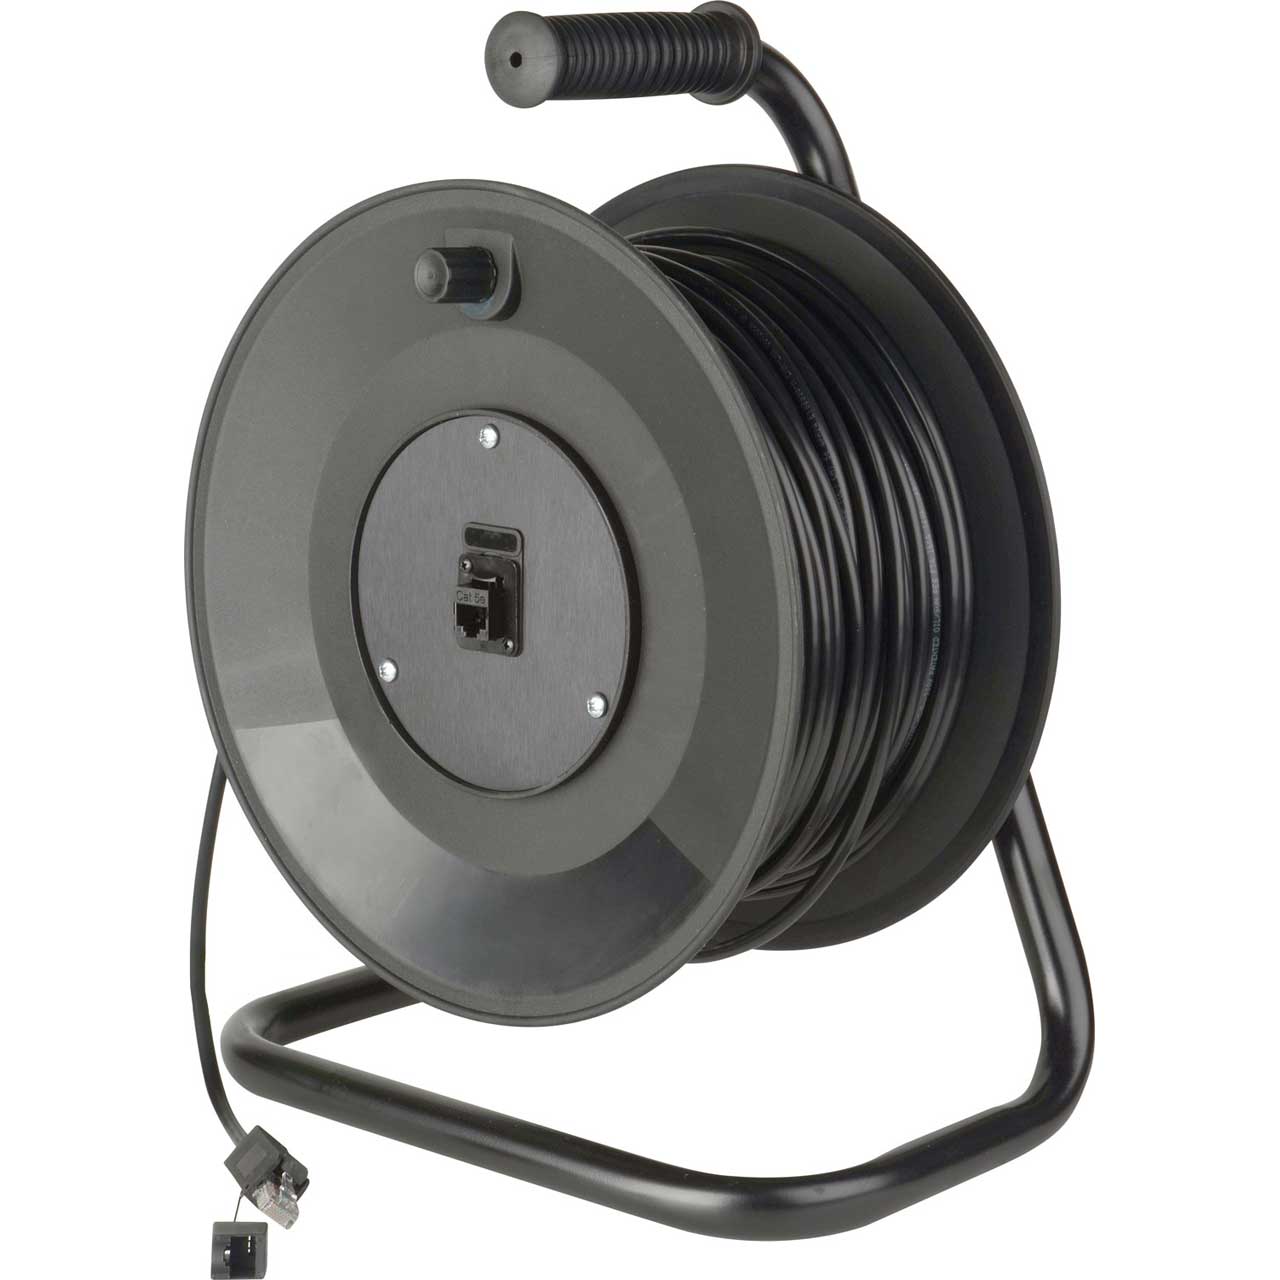 Jackreel MKR-TC-300 Connect-N-Go DataTuff Belden 7923A Cat5e with PRO SHELL  Cable Reel 300 Foot